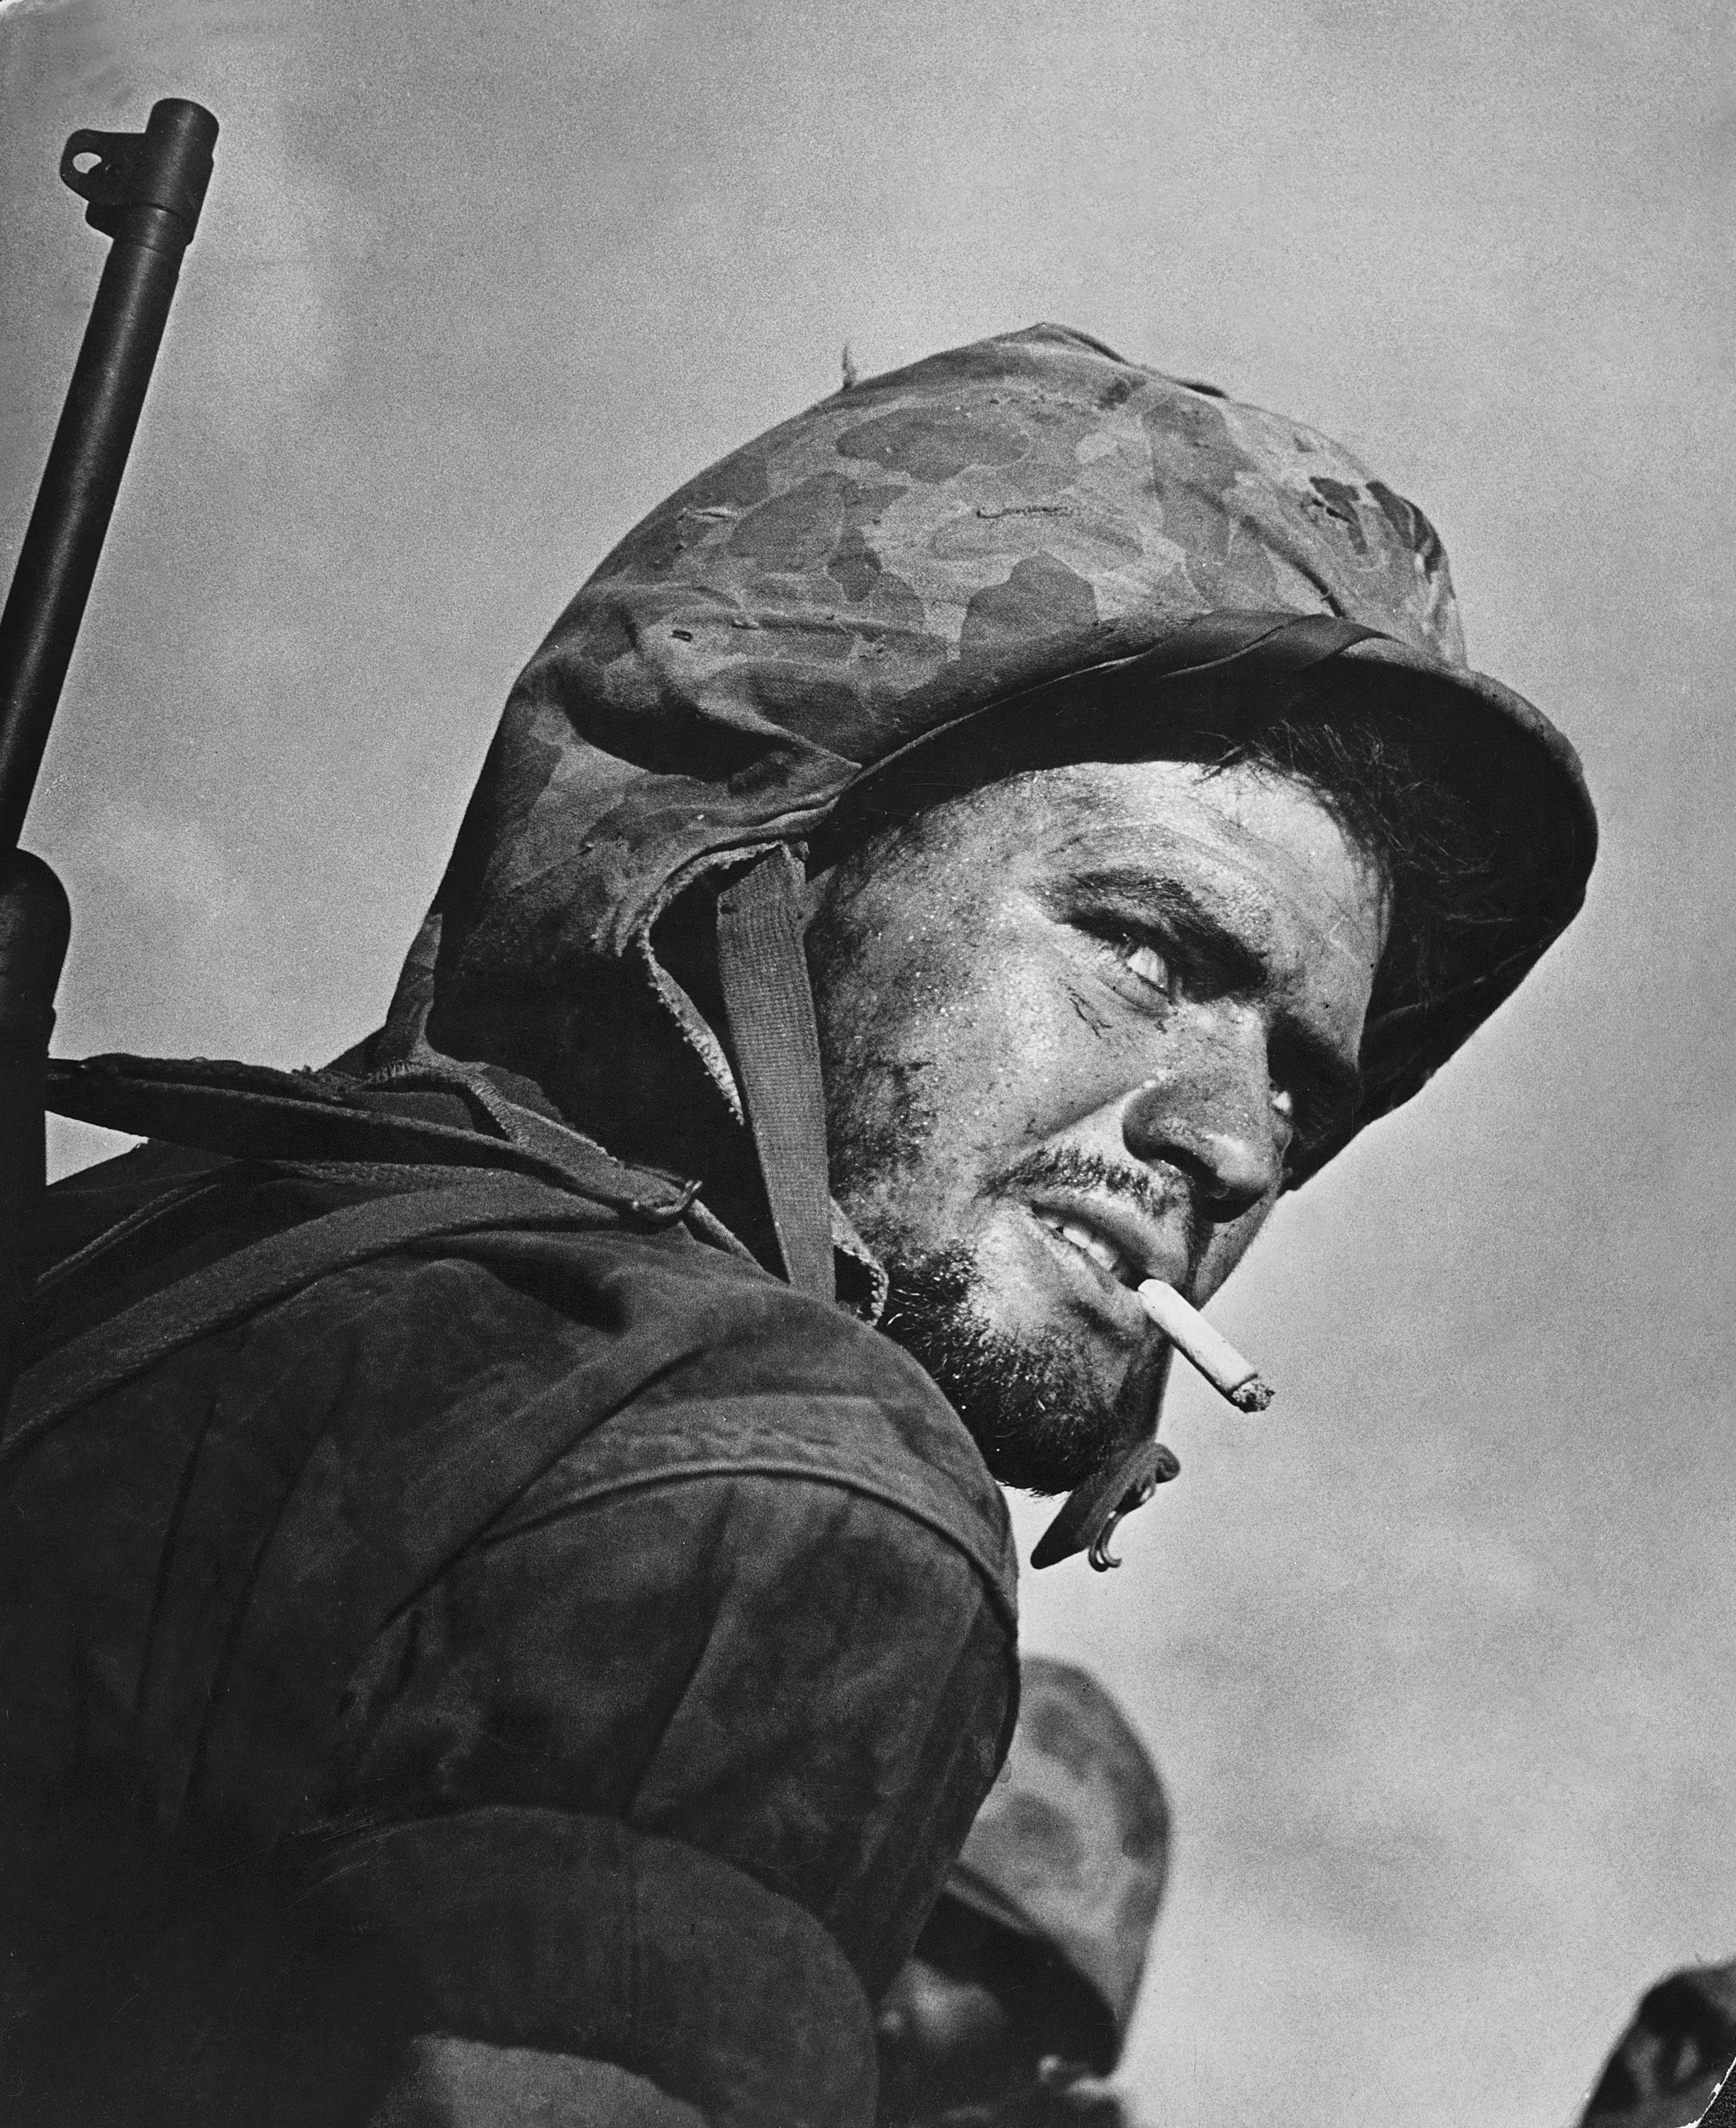 A grizzled, battle-weary Marine peers over his shoulder during the final days of fighting on Saipan, July 1944. (Nick Oza—Arizona Republic)